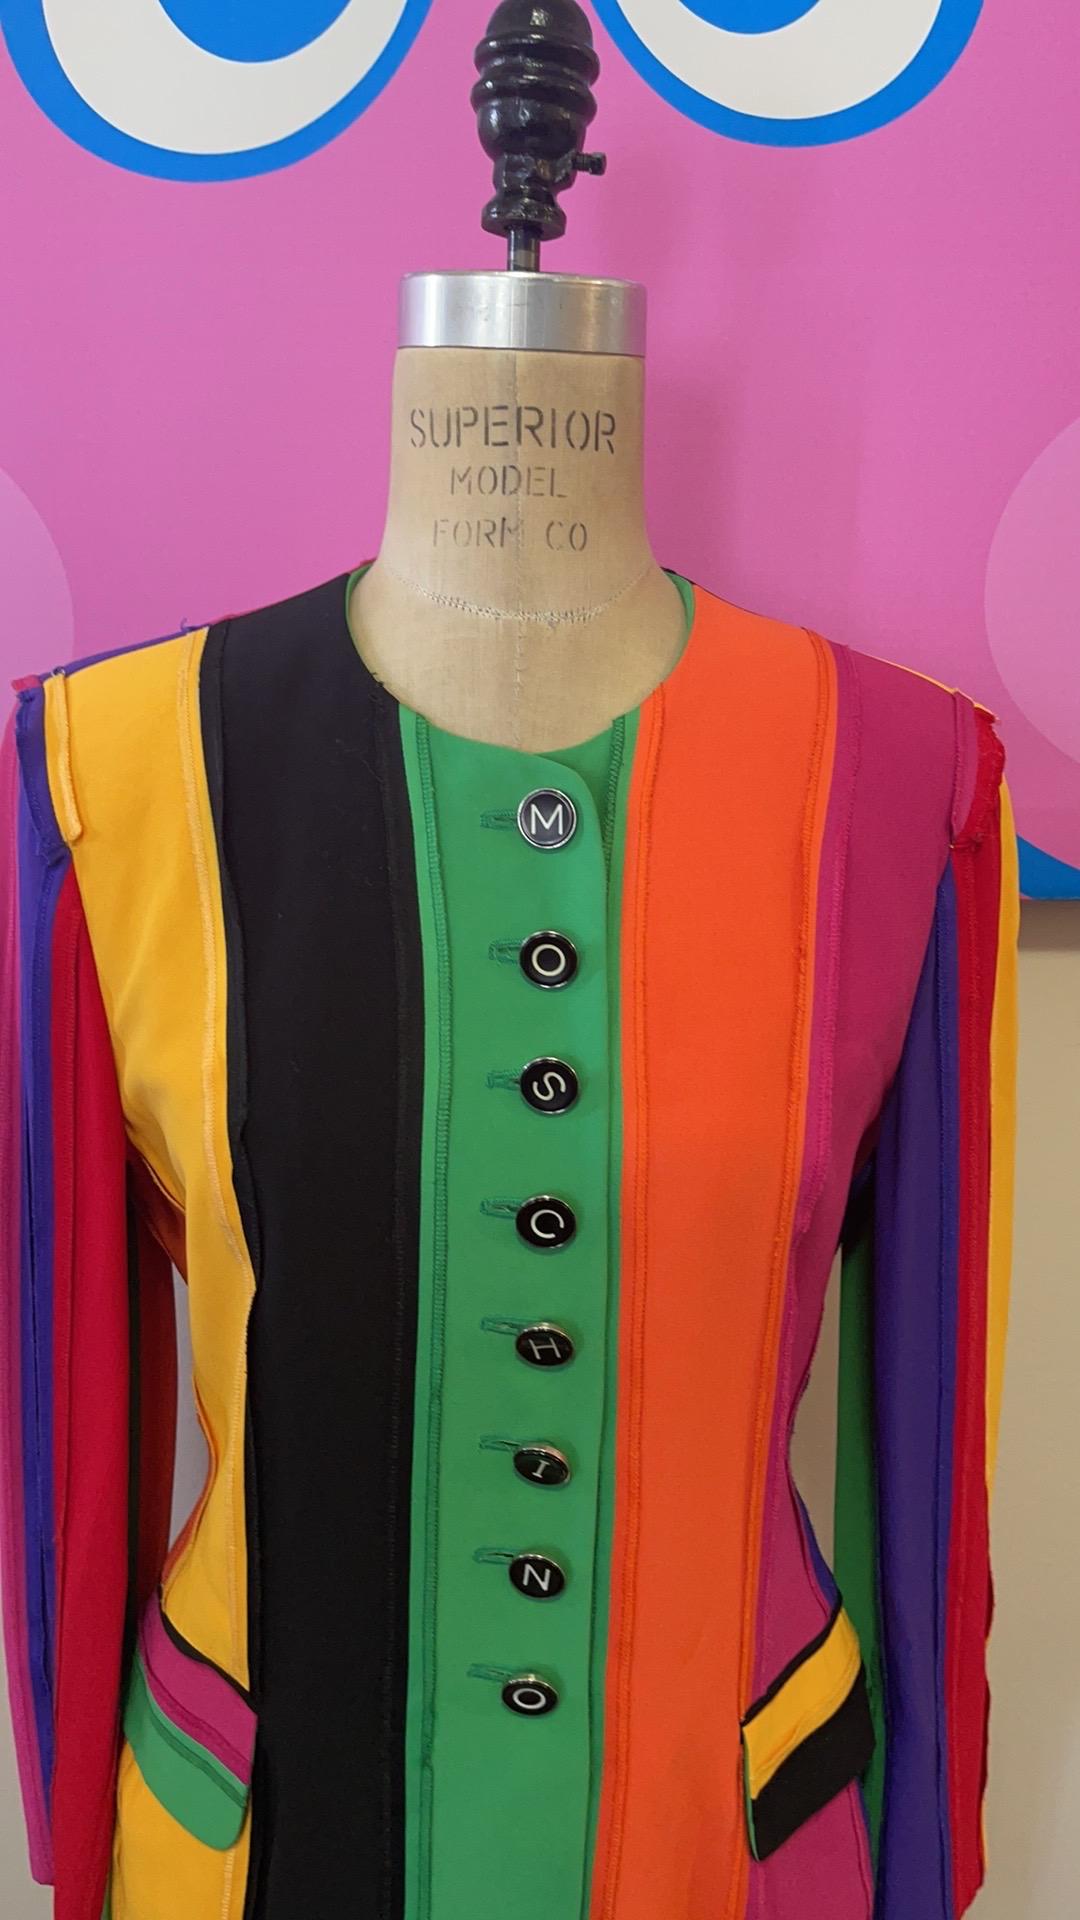 Moschino couture rainbow pride vintage blazer

Be retro cool wearing this super rare vintage jacket by Moschino ! Unique buttons spell out the brand name in front and sleeves. The vest of this style was made famous on the TV show The Nanny, worn by